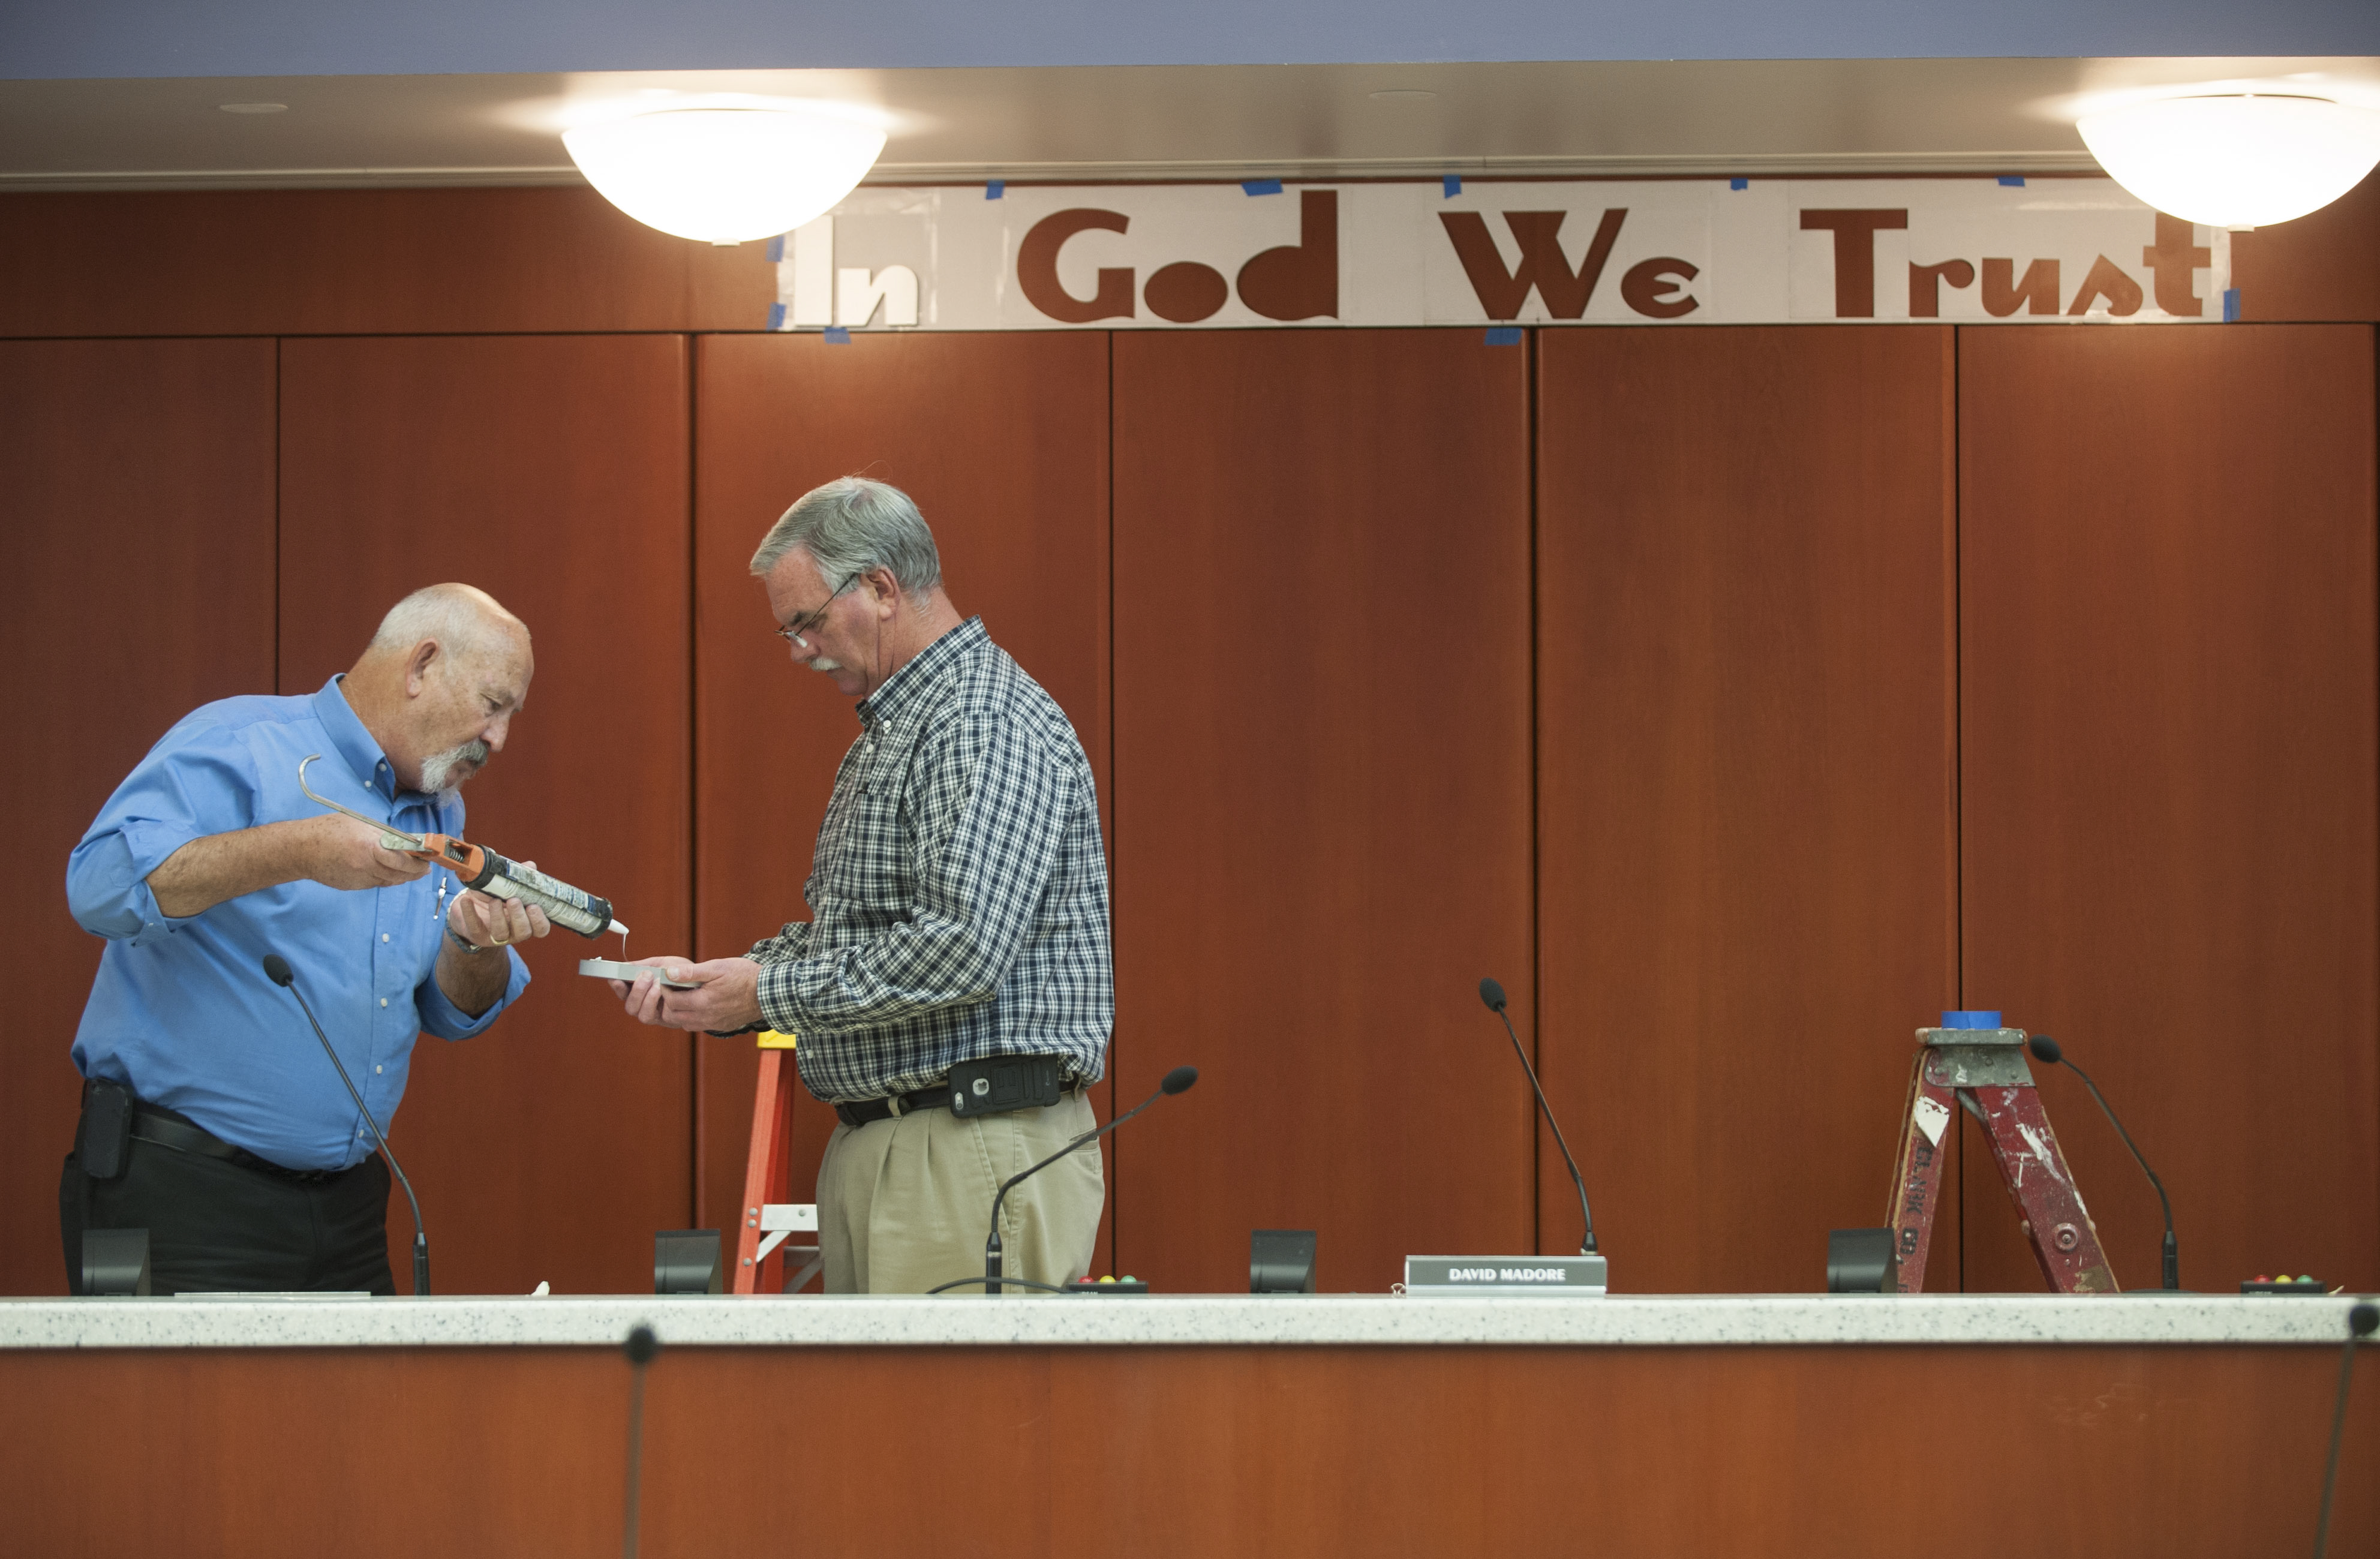 County facilities managers Darrel Stump, left and Mike Wright put glue on the back of a letter as the "In God We Trust " slogan is installed Thursday. (Natalie Behring/The Columbian)